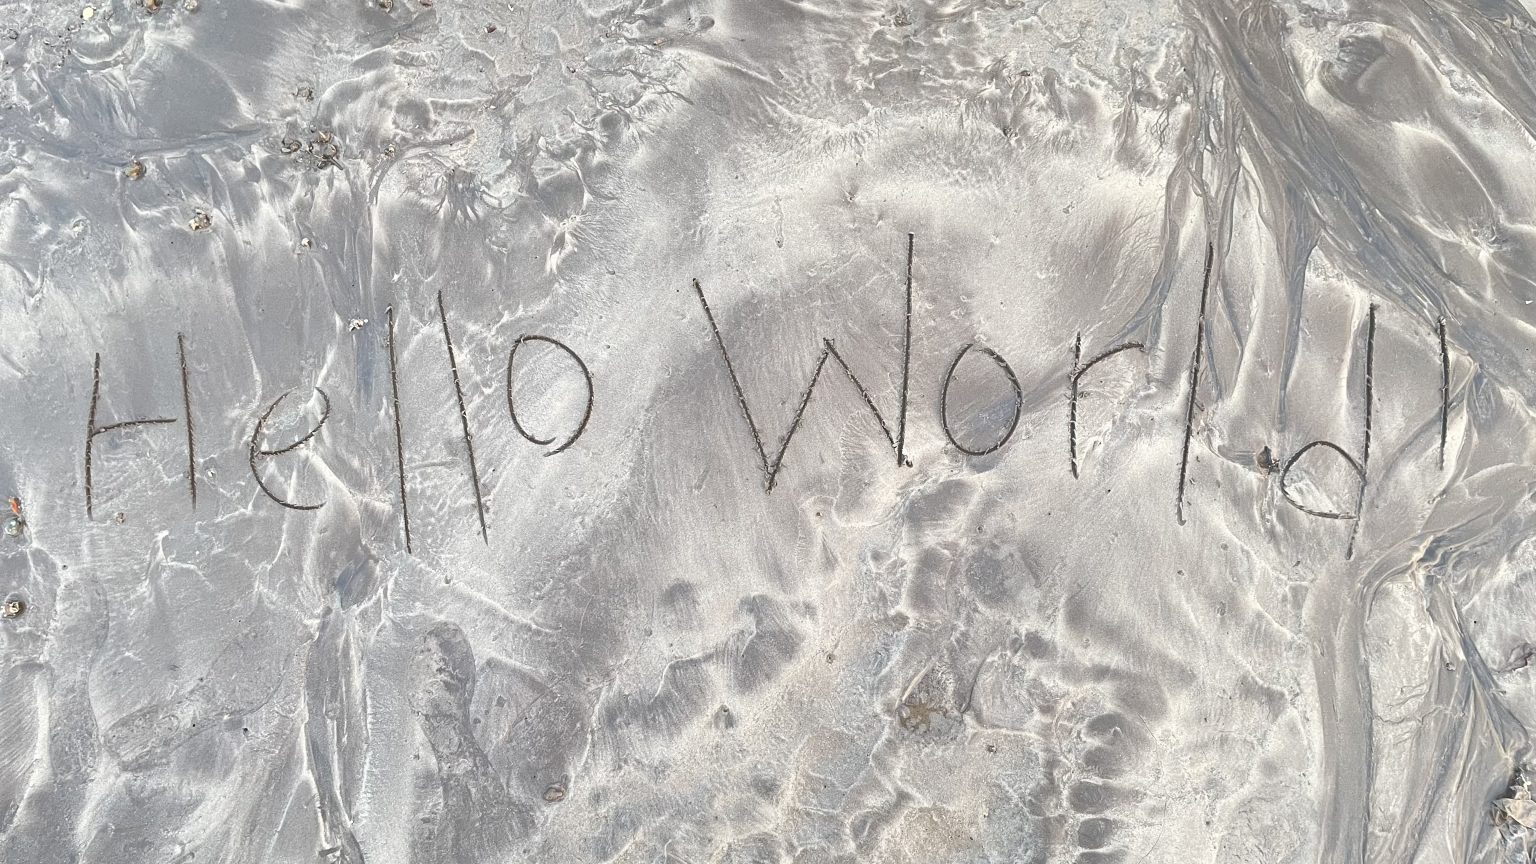 "Hello World" etched in the sand on Alibag beach, Mumbai.